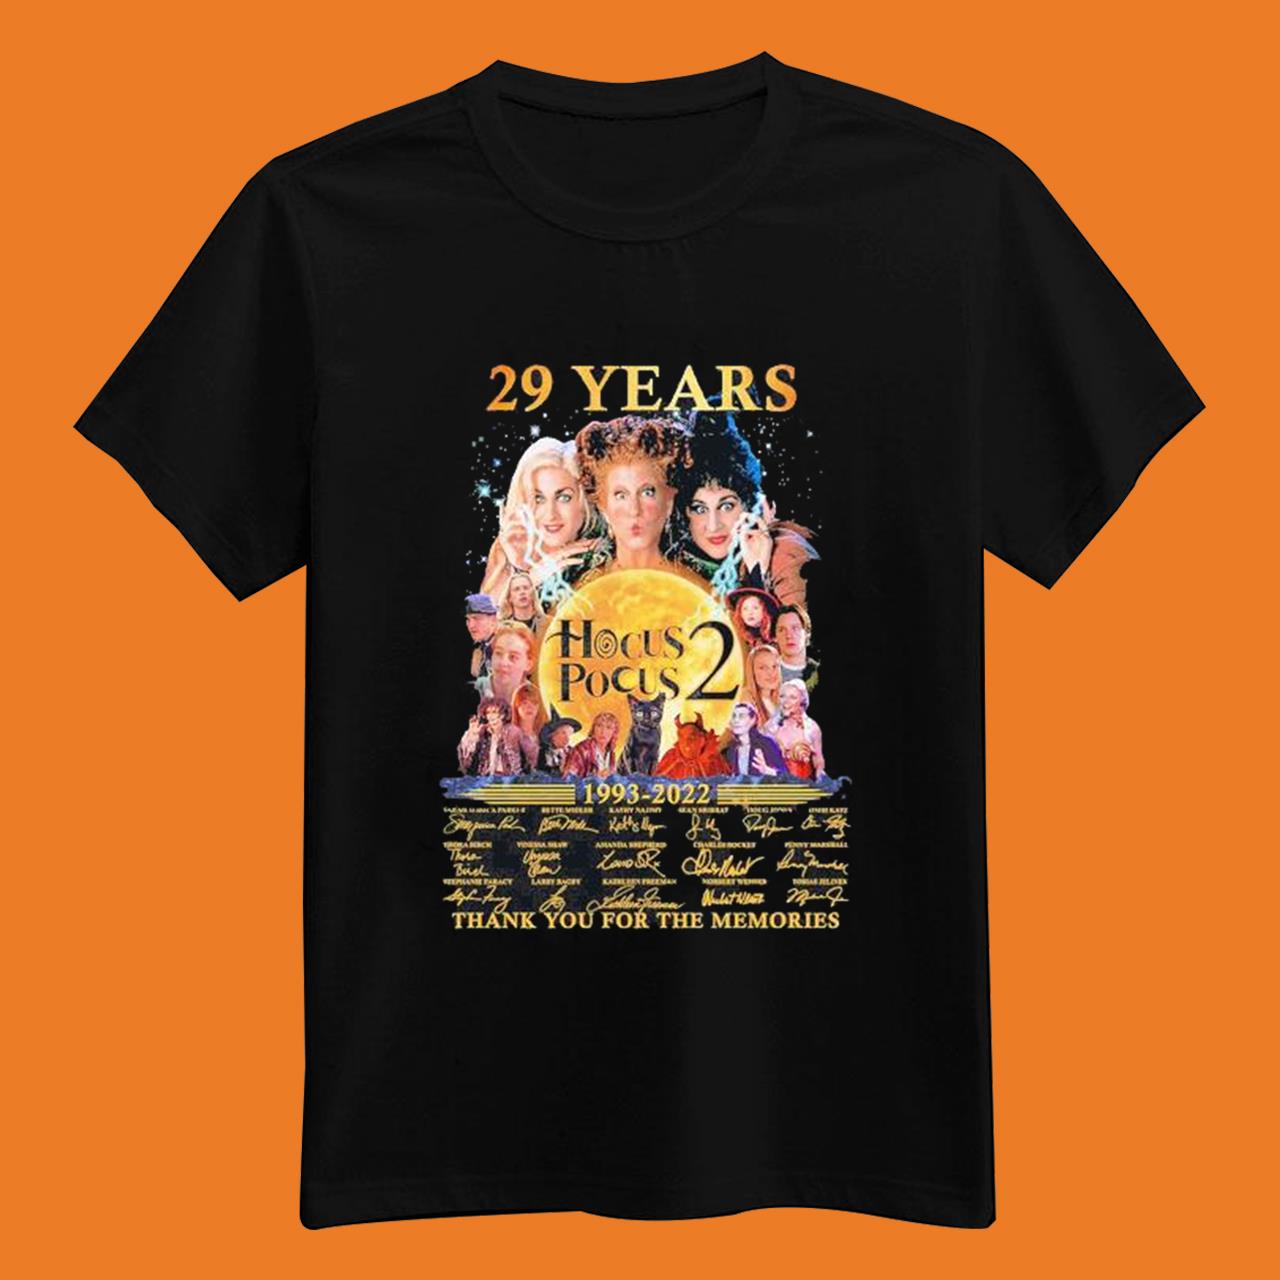 29 Years Hocus Pocus 2 1993-2022 Thank You For The Memories Signatures Shirt